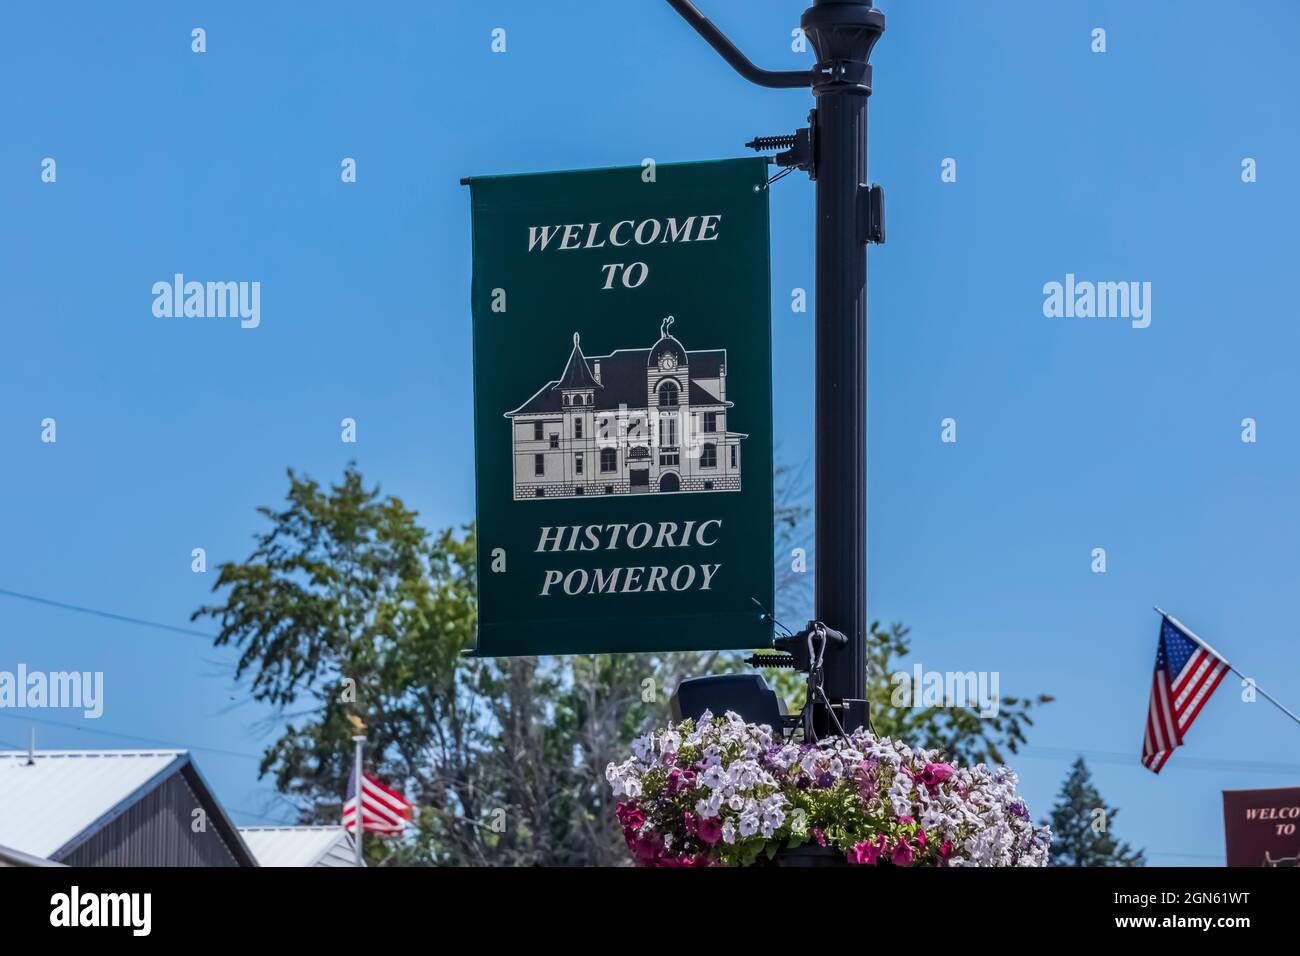 Banner welcoming visitors to Pomeroy, Washington State, USA Stock Photo